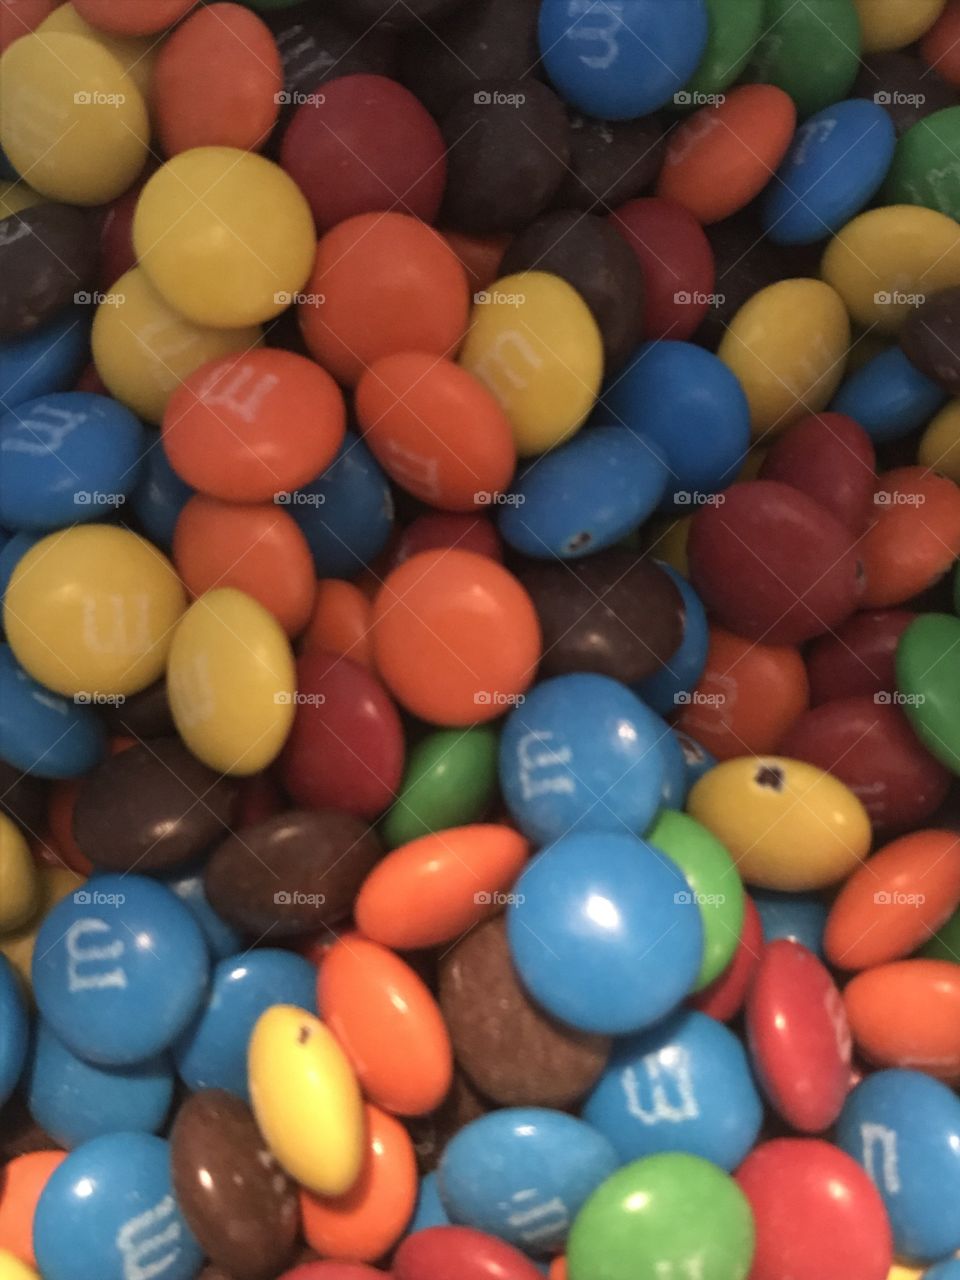 A rainbow pile of M&M’s, some chipped